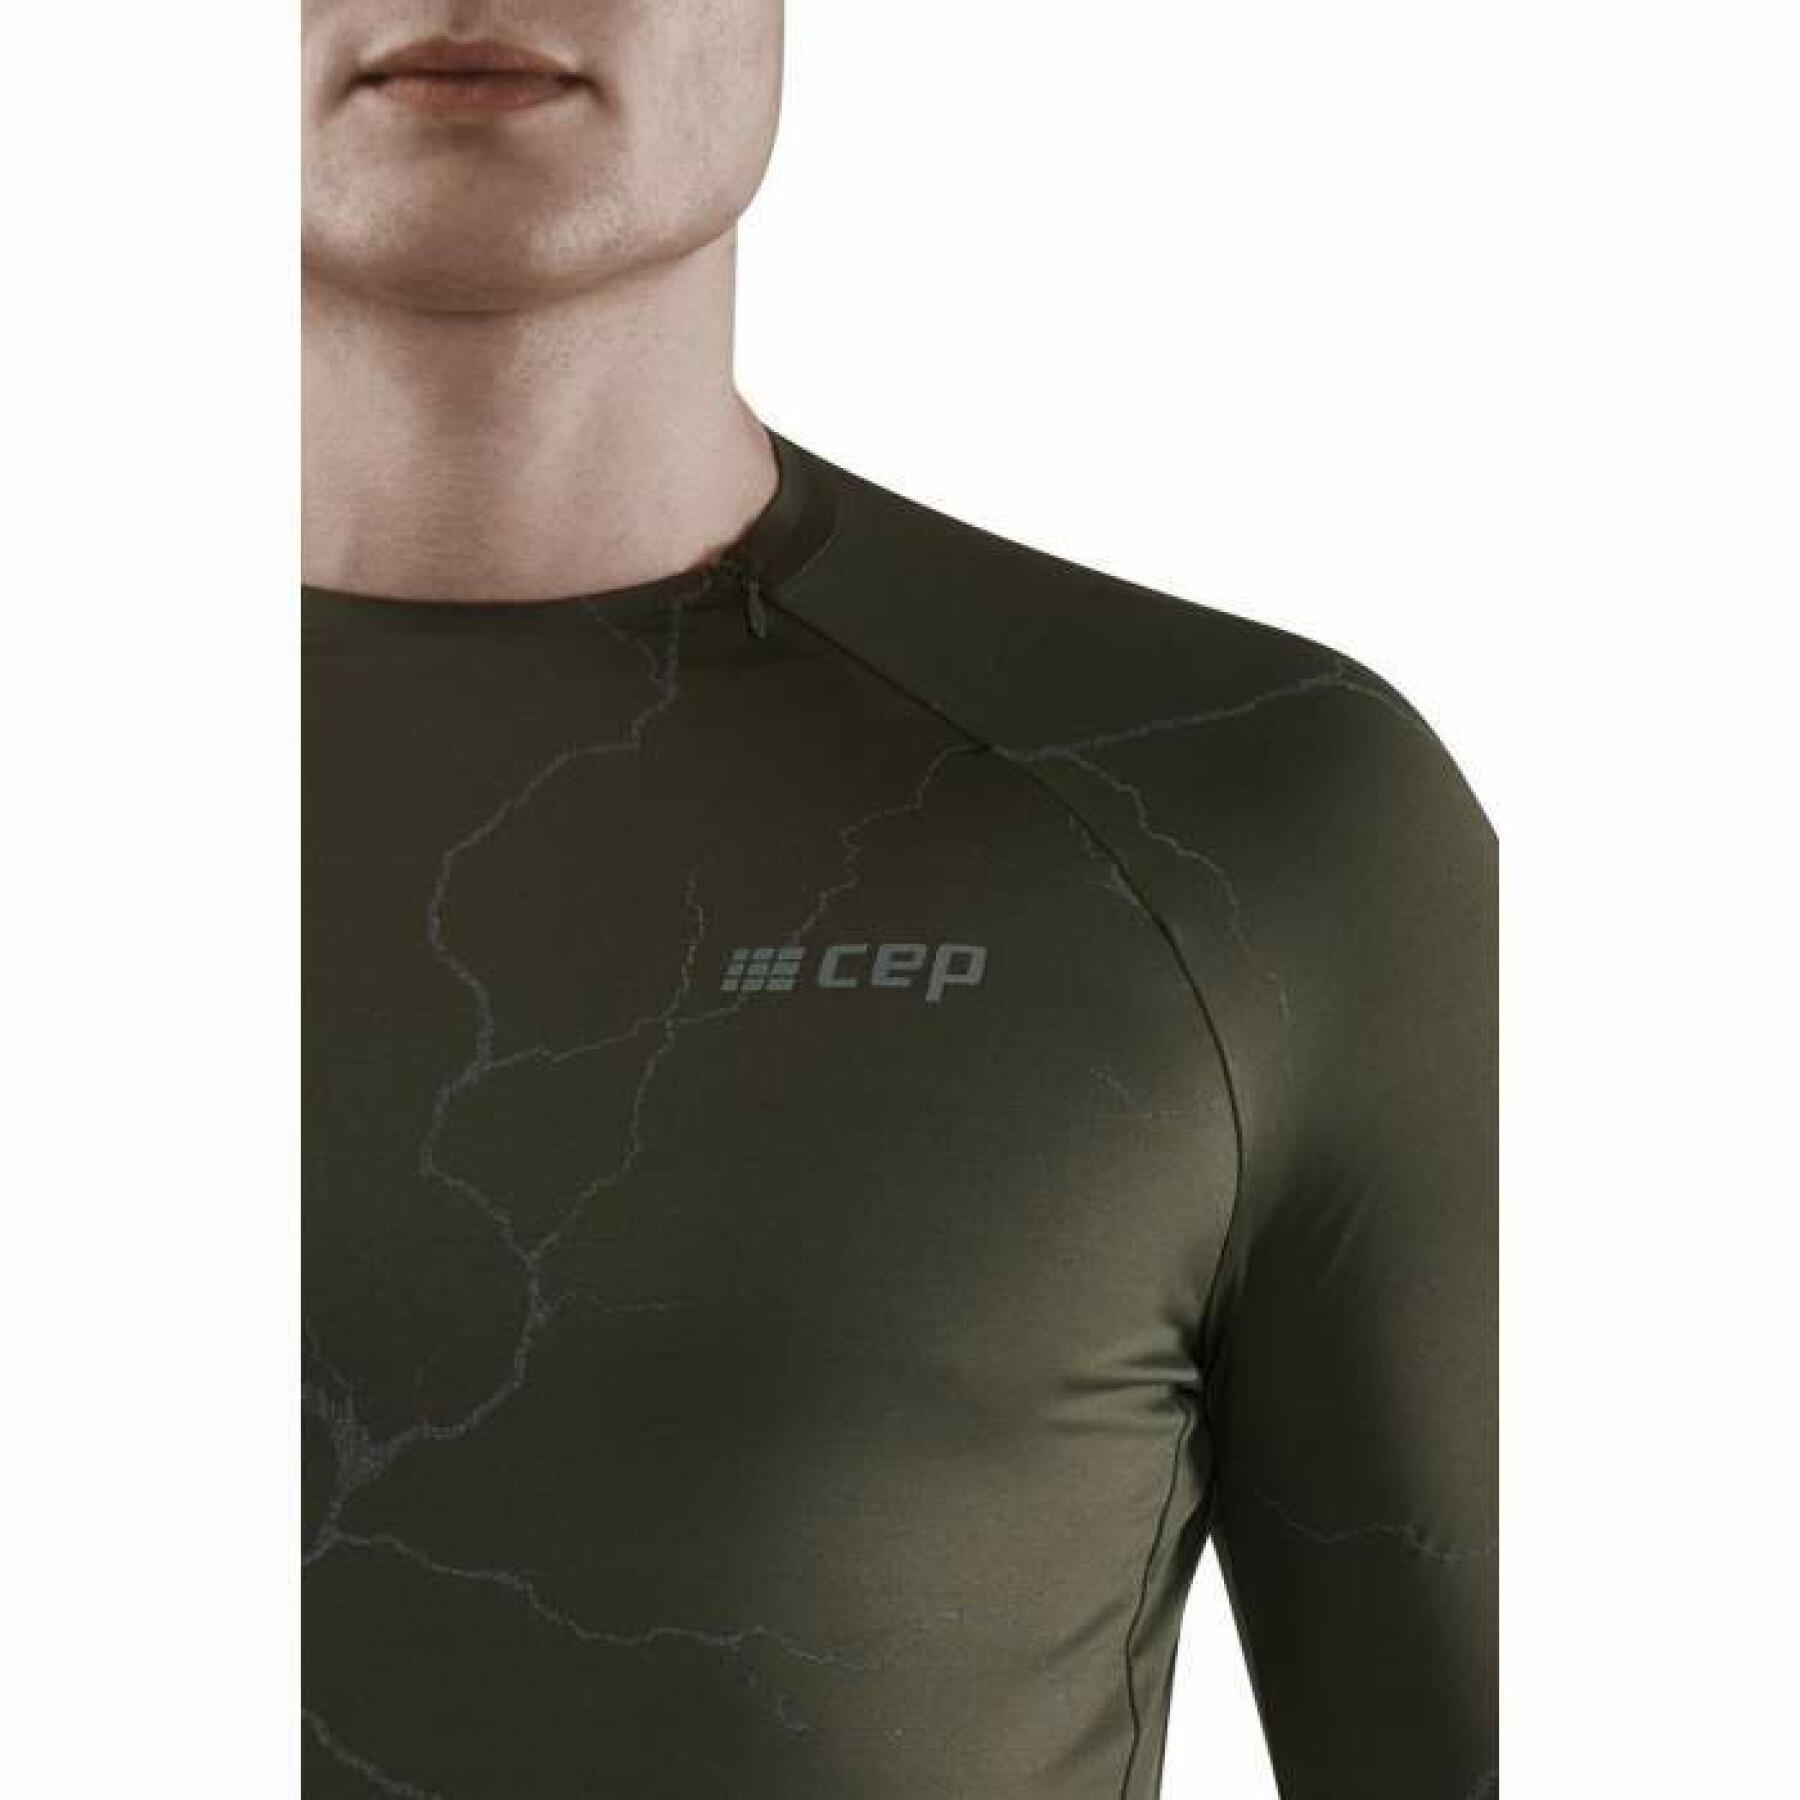 T-shirt manches longues CEP Compression Reflective